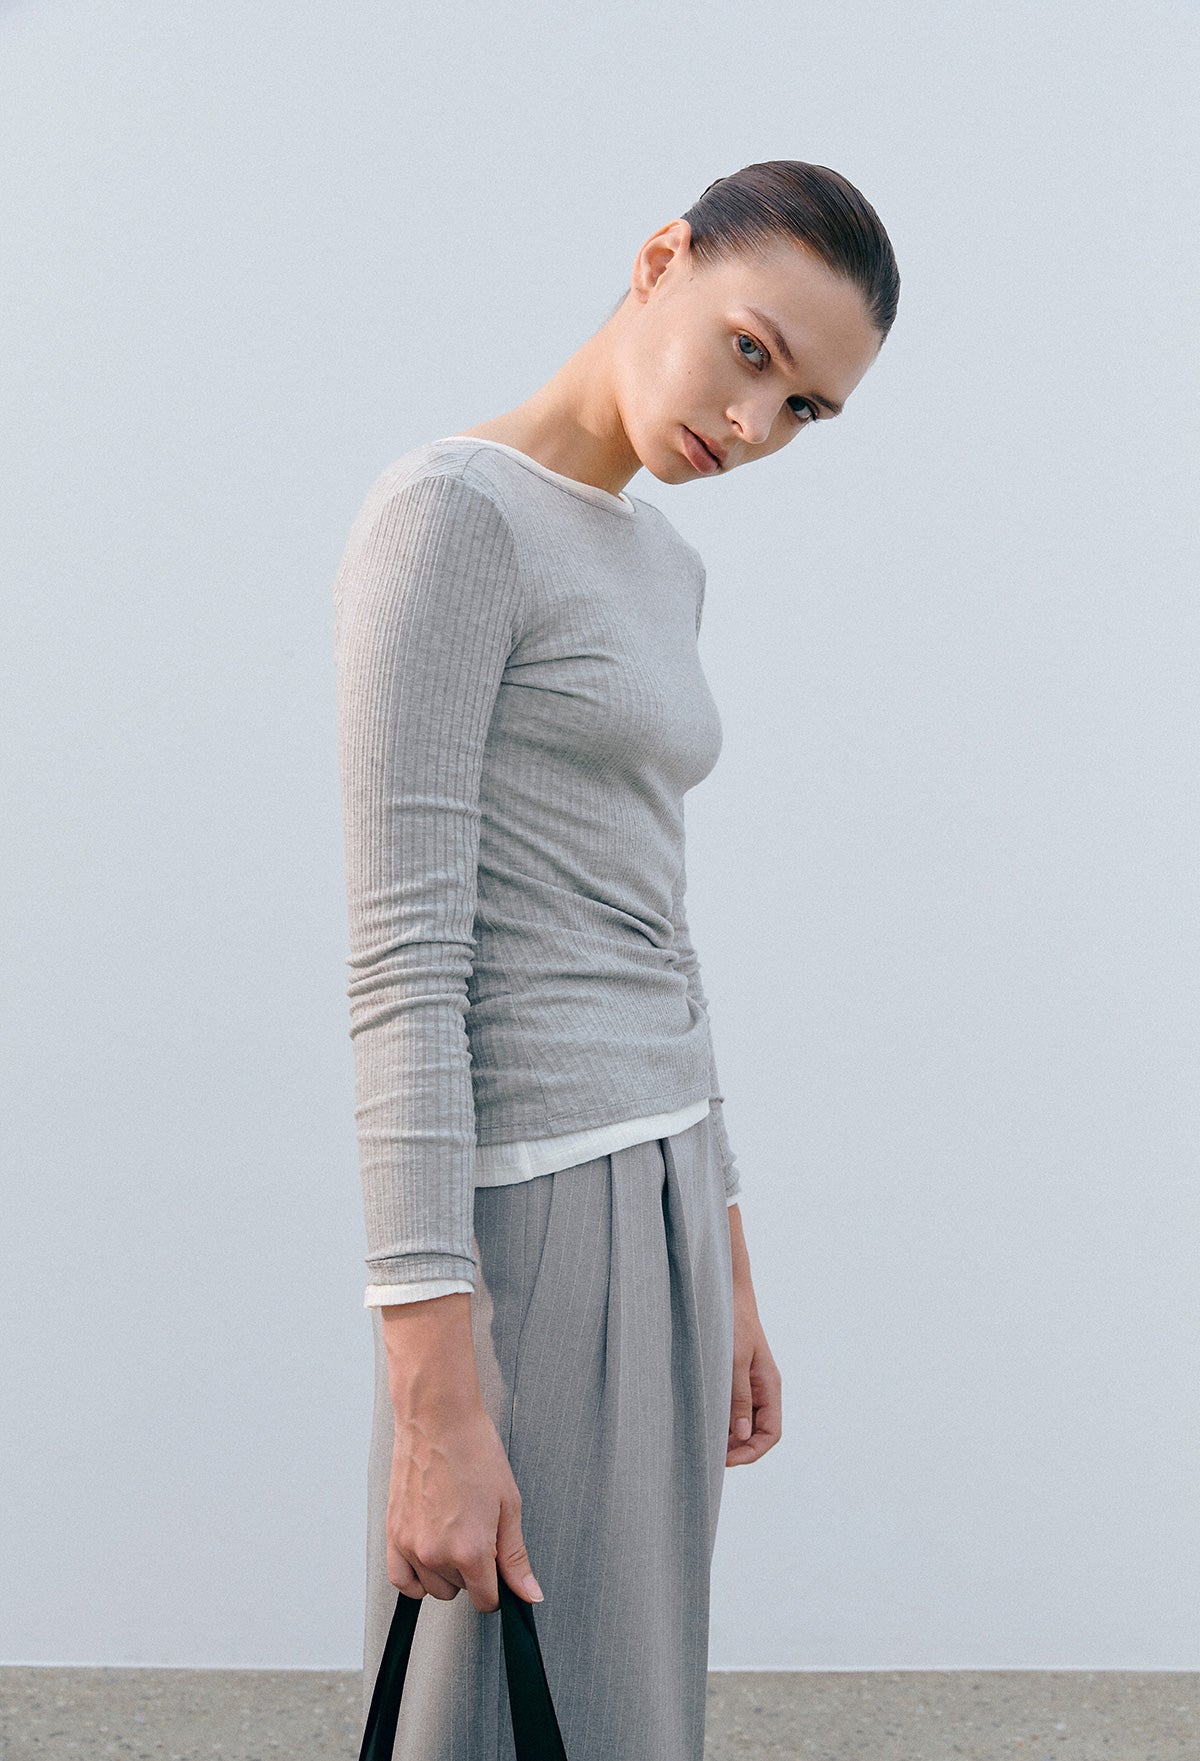 Twisted-back Cutout Ribbed Top In Melange Gray